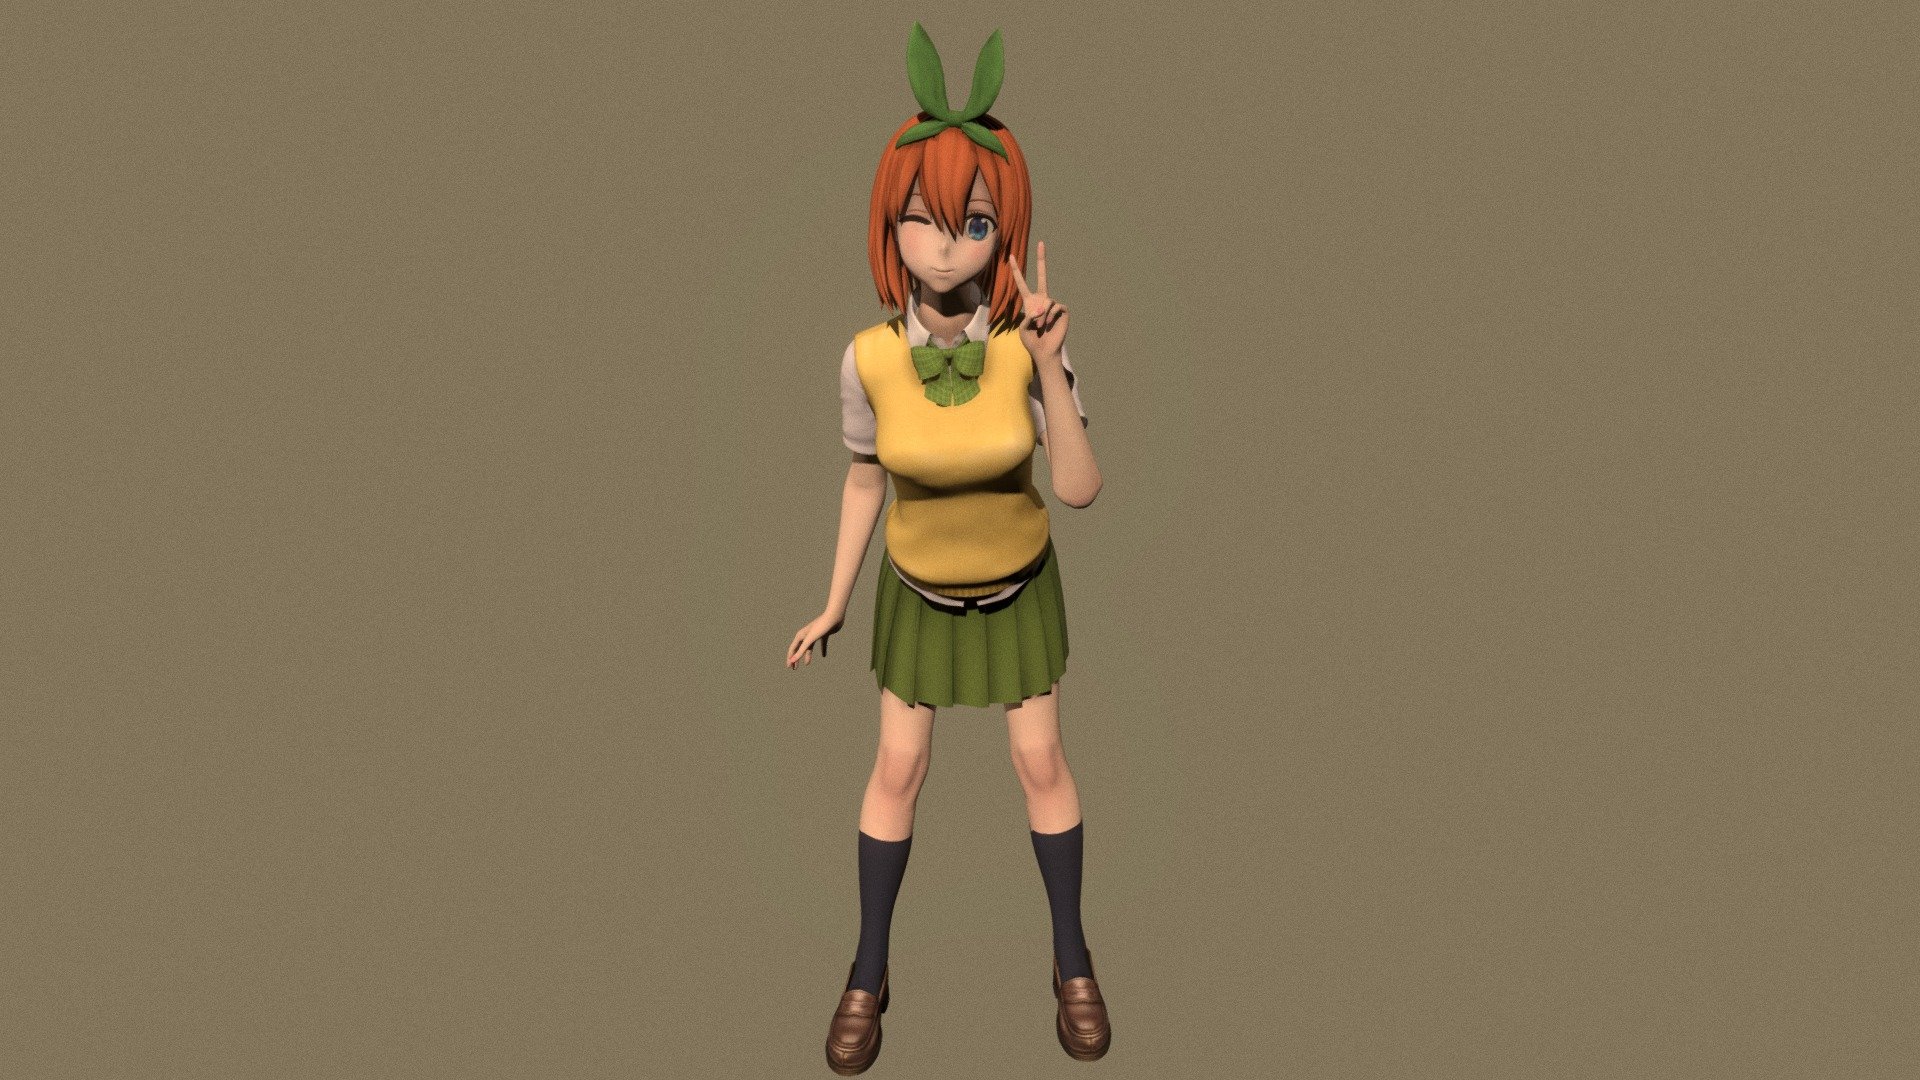 Posed model of anime girl Yotsuba Nakano (The Quintessential Quintuplets).

This product include .FBX (ver. 7200) and .MAX (ver. 2010) files.

Rigged version: https://sketchfab.com/3d-models/t-pose-rigged-model-of-yotsuba-nakano-2440e96bcb8f47349aff12670b29dc68

I support convert this 3D model to various file formats: 3DS; AI; ASE; DAE; DWF; DWG; DXF; FLT; HTR; IGS; M3G; MQO; OBJ; SAT; STL; W3D; WRL; X.

You can buy all of my models in one pack to save cost: https://sketchfab.com/3d-models/all-of-my-anime-girls-c5a56156994e4193b9e8fa21a3b8360b

And I can make commission models.

If you have any questions, please leave a comment or contact me via my email 3d.eden.project@gmail.com 3d model